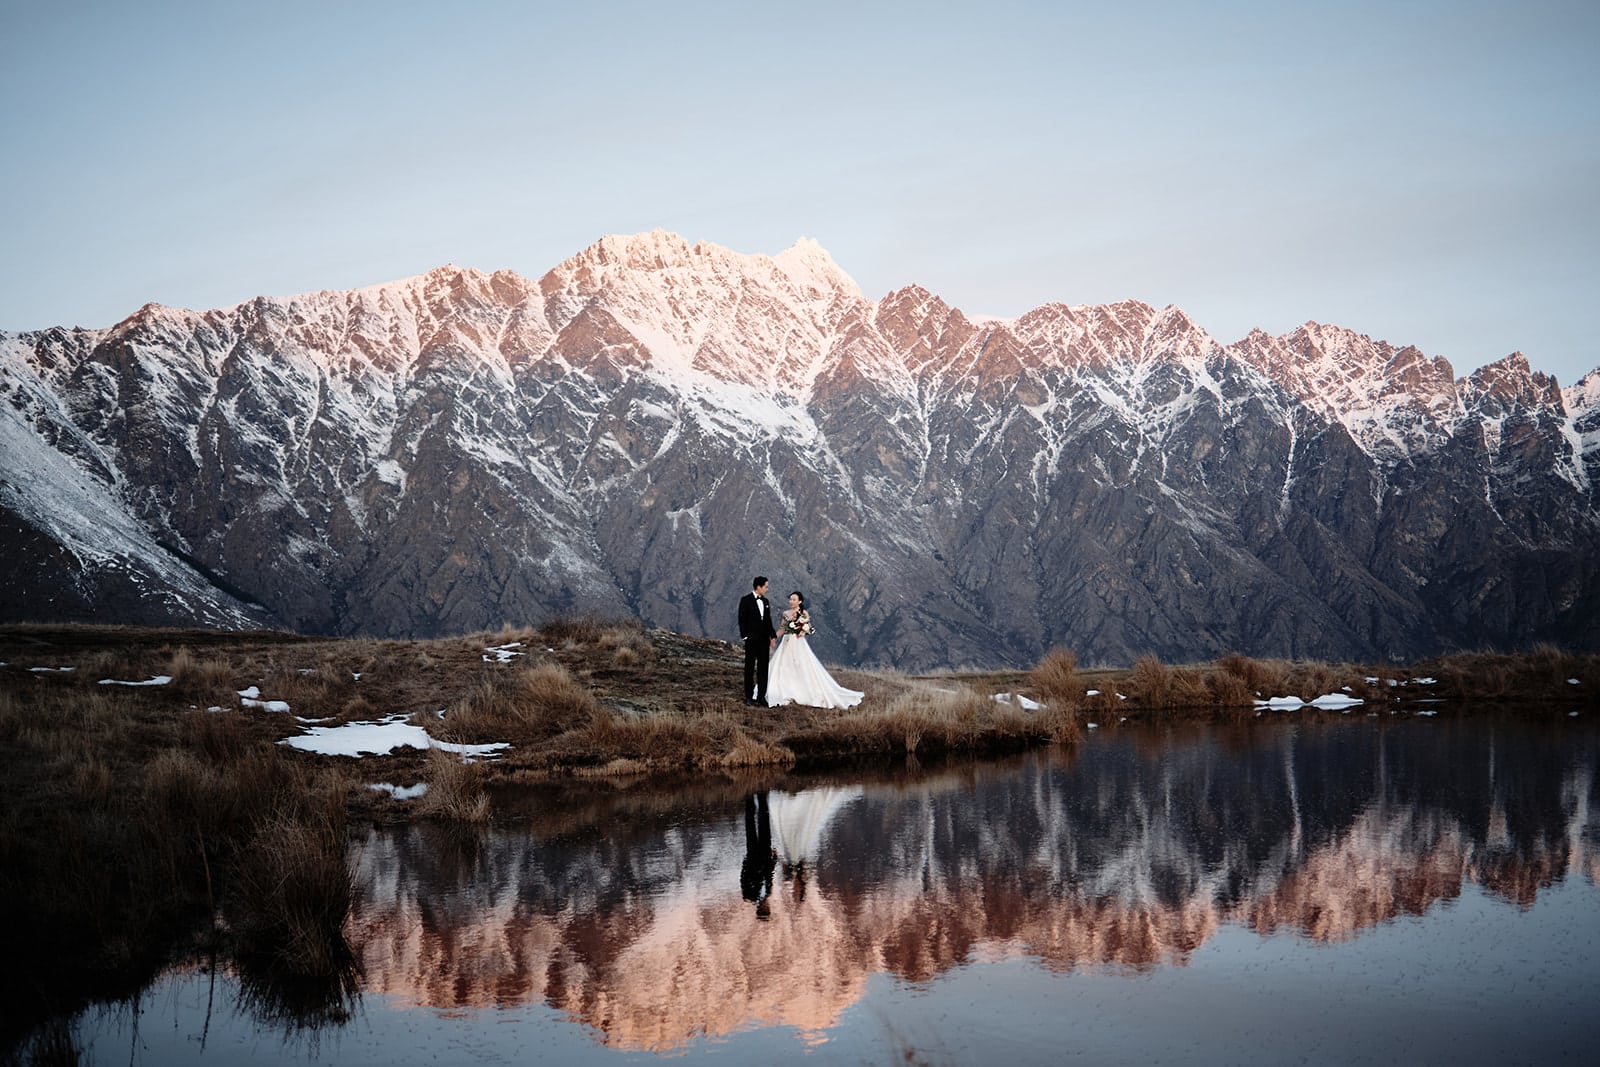 Queenstown New Zealand Elopement Wedding Photographer - A bride and groom enjoying a romantic heli-wedding package in Queenstown, with a stunning lake and mountains as their backdrop.